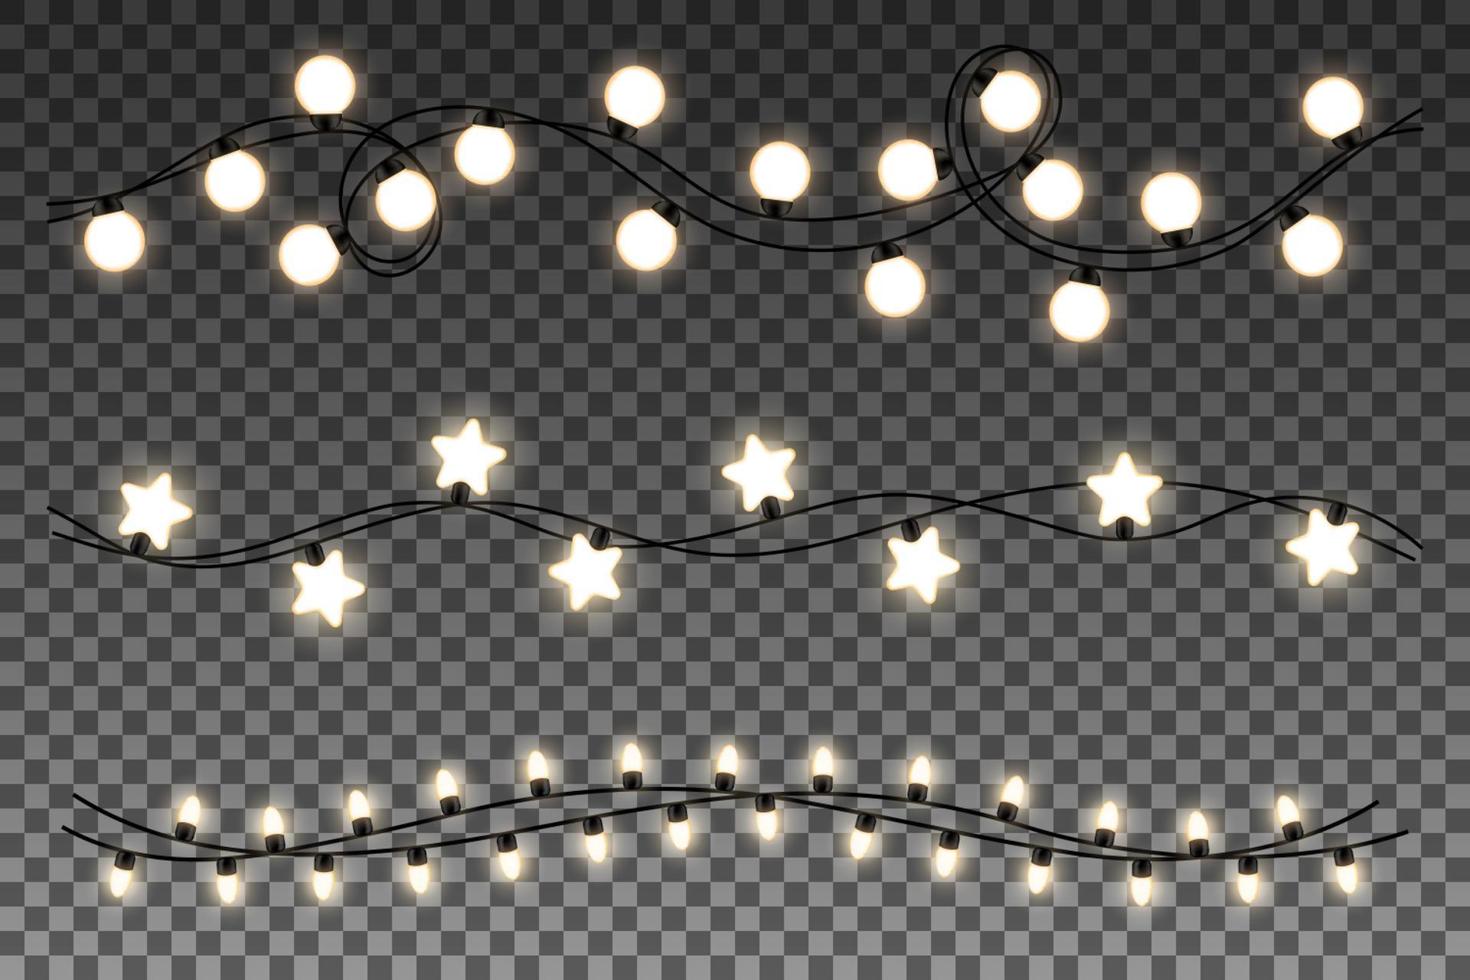 Glowing lights isolated on transparent background. Set of realistic glowing garlands. Vector illustration.